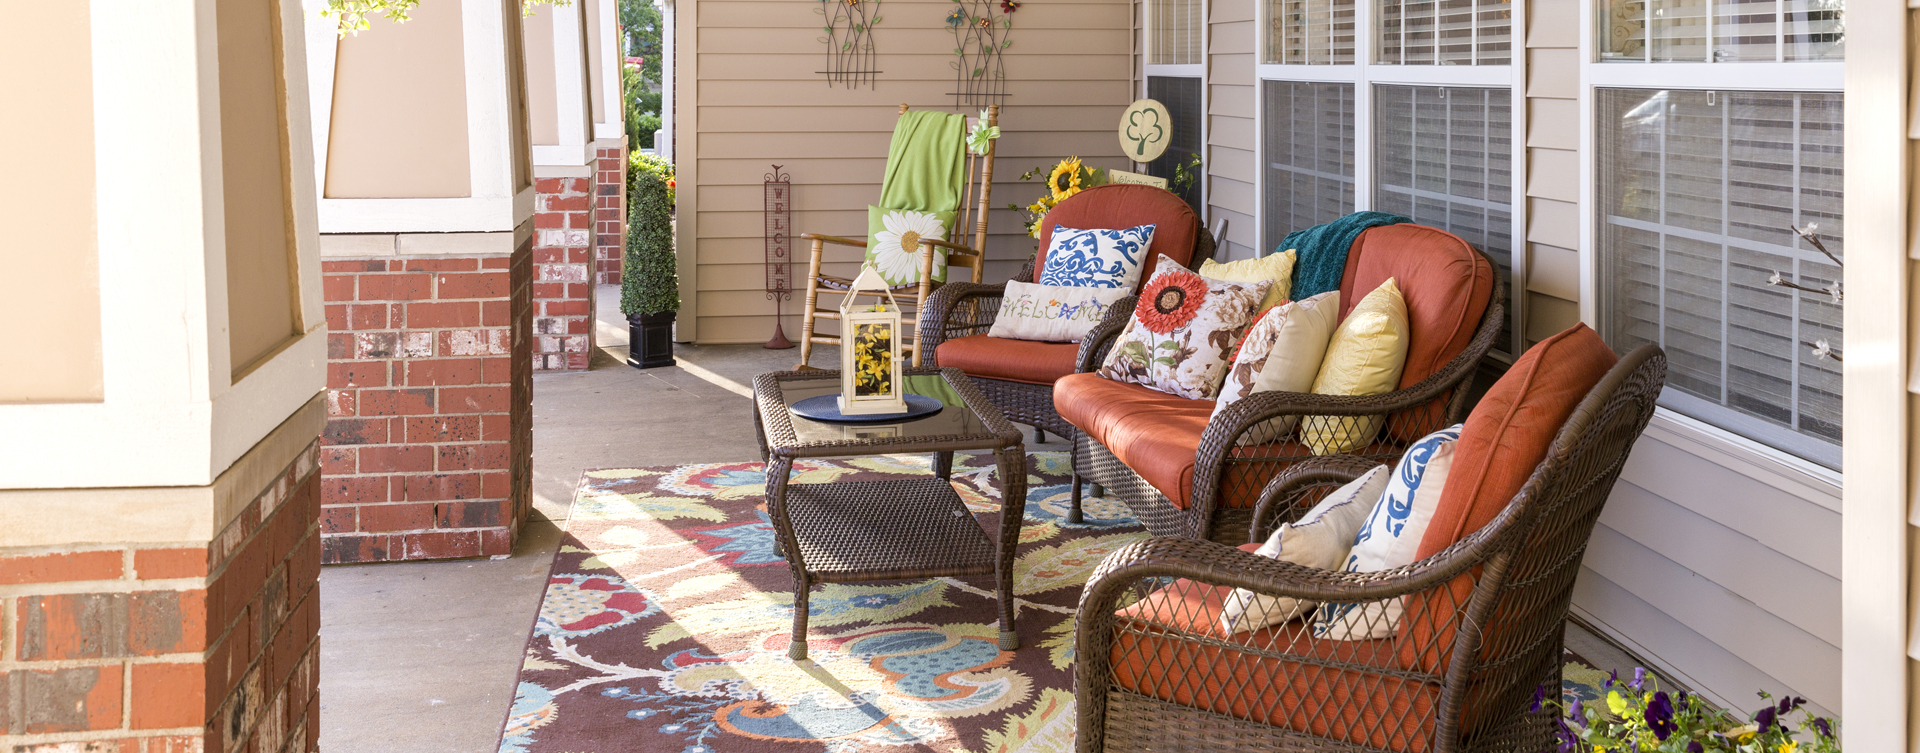 Relax in your favorite chair on the porch at Bickford of Omaha - Hickory